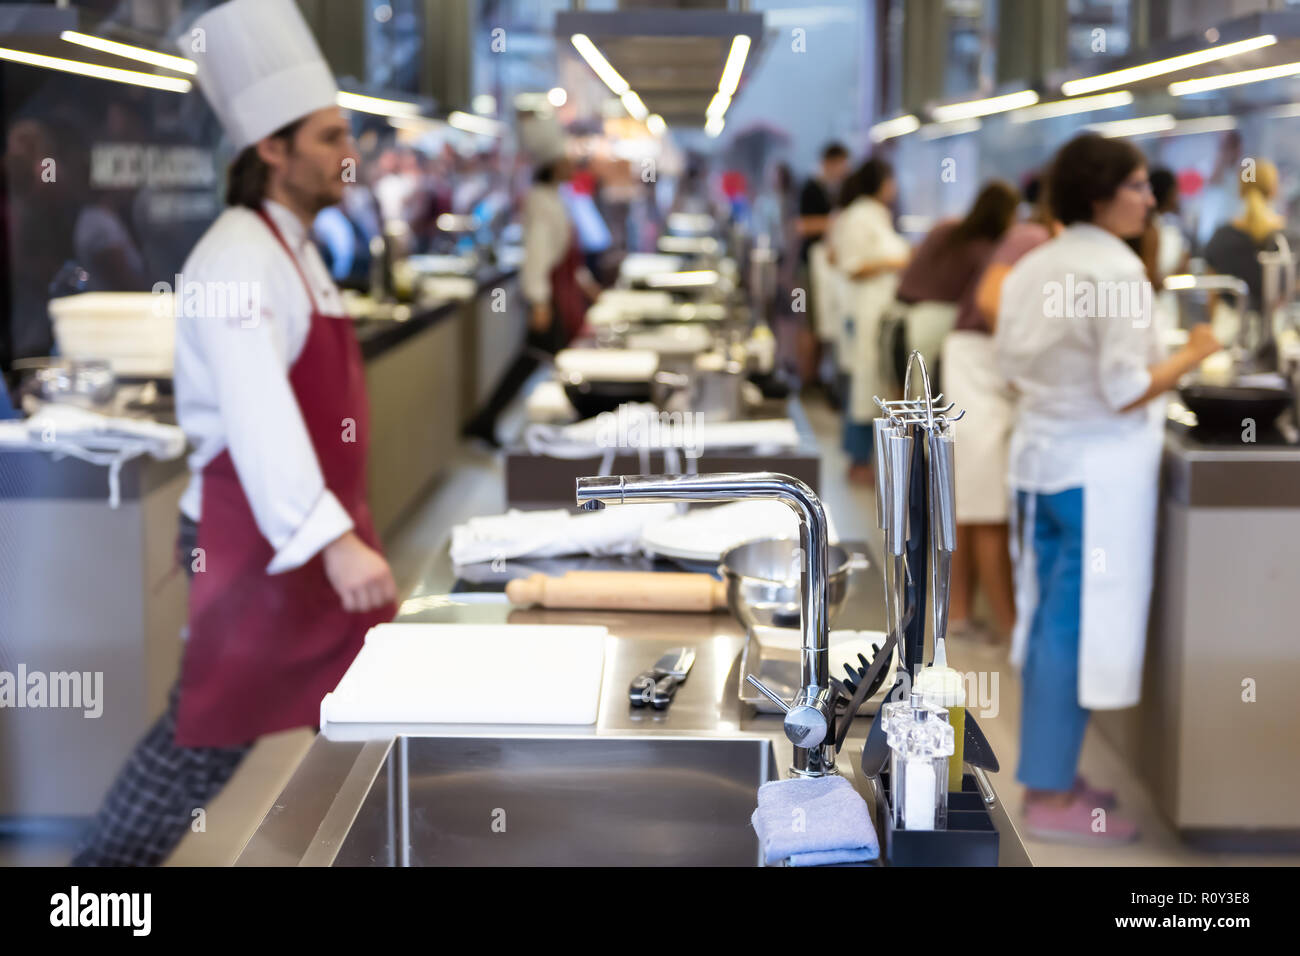 Florence, Italy - August 30, 2018: Kitchen of restaurants, cafes in Firenze Centrale Mercato, central market with cooks, chefs walking, stainless stee Stock Photo